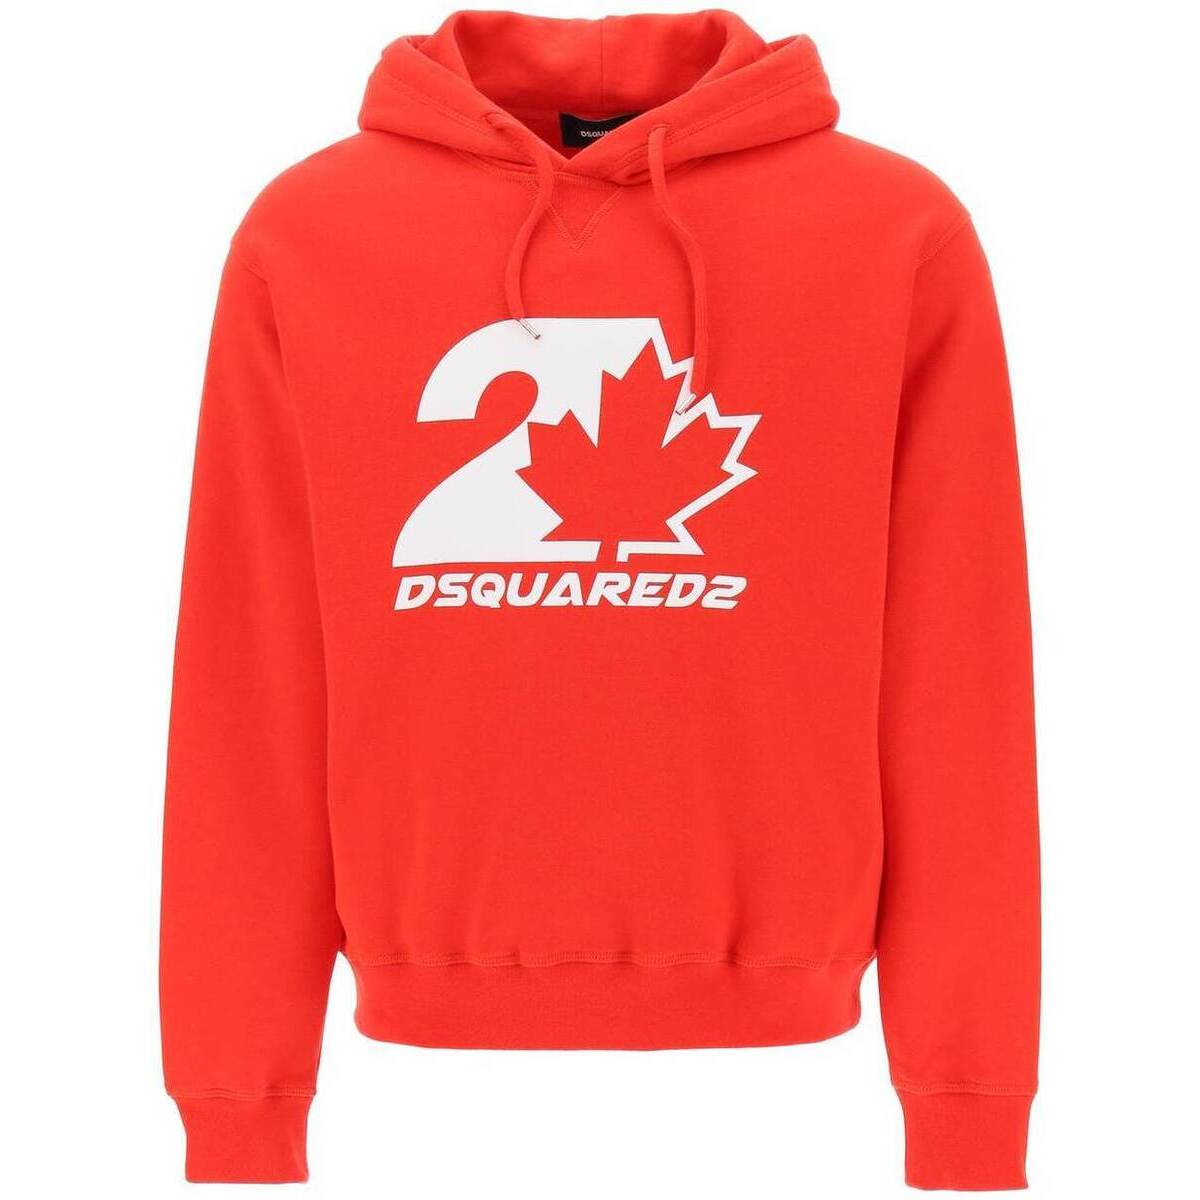 DSQUARED2 ǥ å Rosso Dsquared2 printed hoodie ȥ졼ʡ  2023 S74GU0728 S25516 ڴǡ̵ۡڥåԥ̵ ik